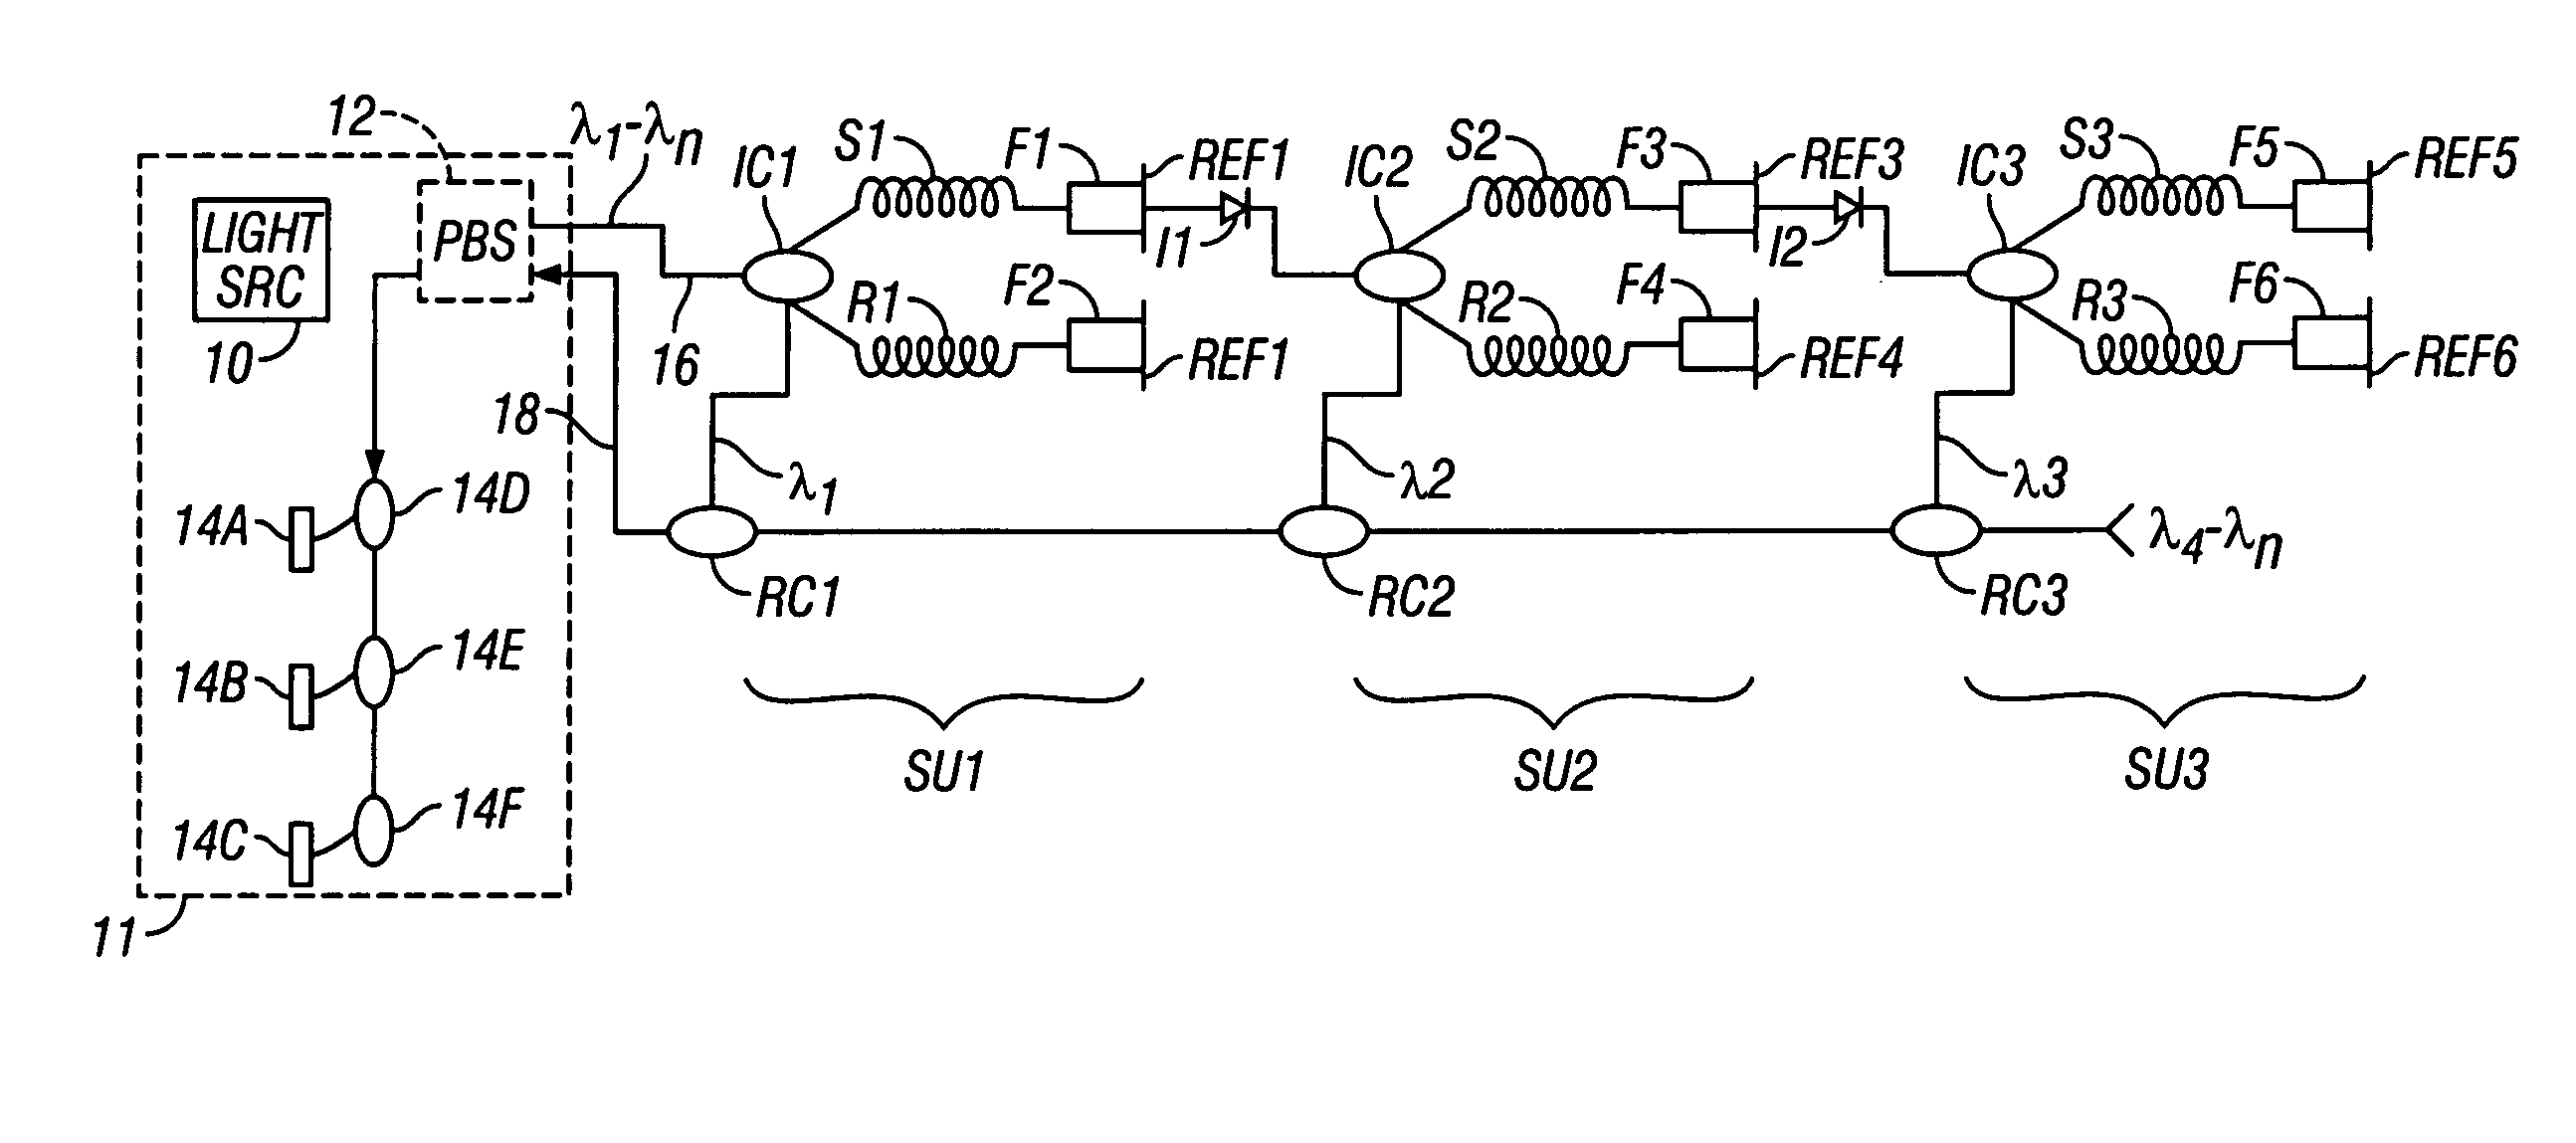 Frequency division and/or wavelength division multiplexed recursive fiber optic telemetry scheme for an optical sensor array